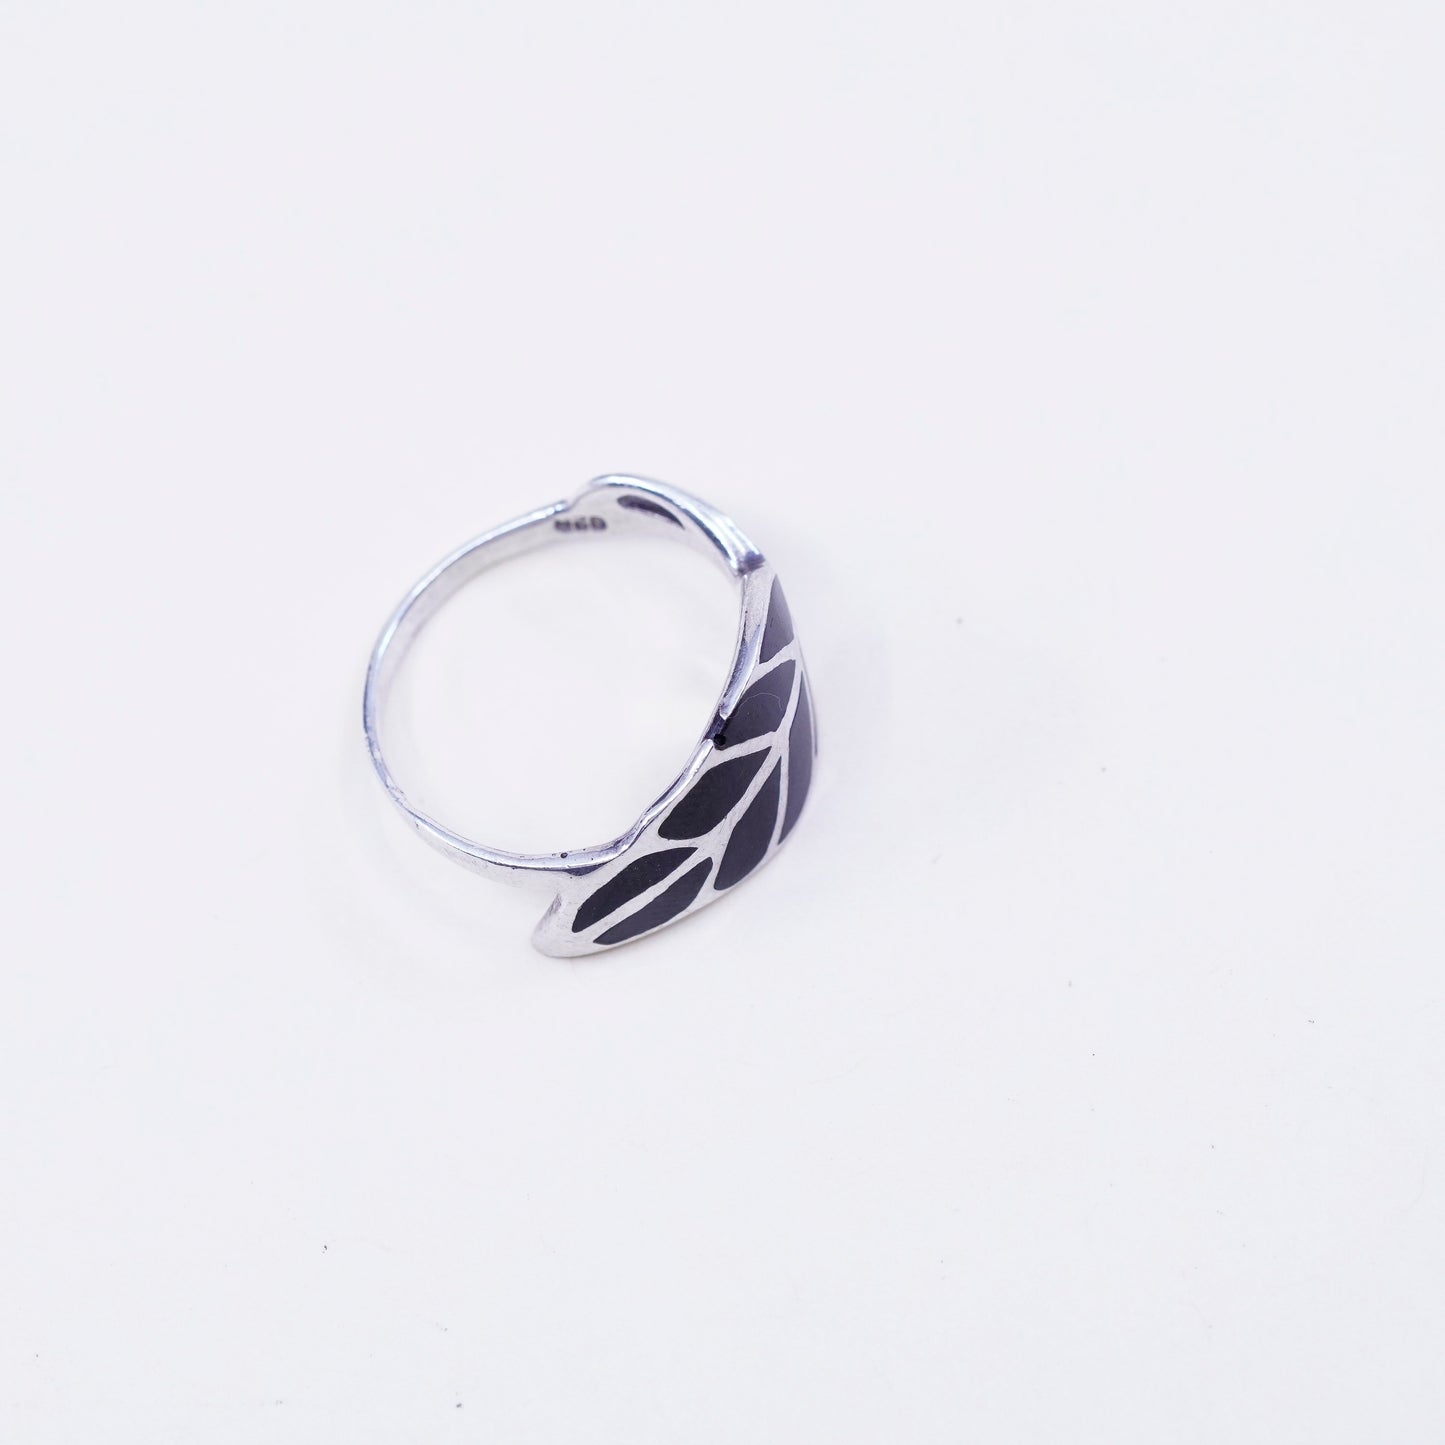 Size 7, Vintage sterling 925 silver handmade leaf ring with onyx inlay